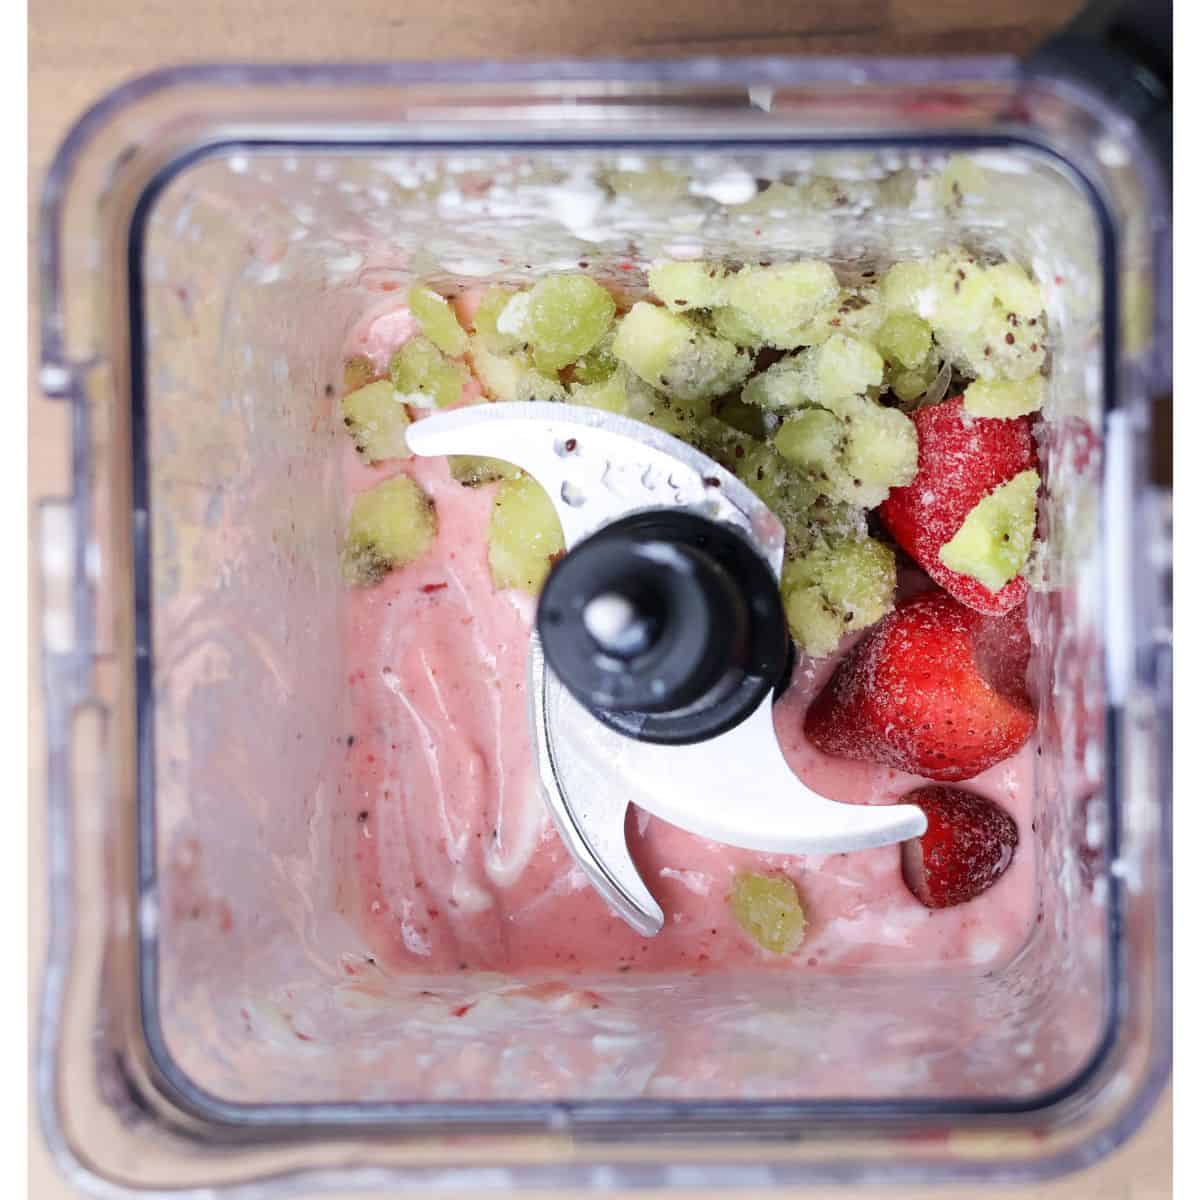 The blender now shows a half-blended mixture with more frozen kiwi and strawberries visible, suggesting ingredients have been added to adjust the consistency of the smoothie.